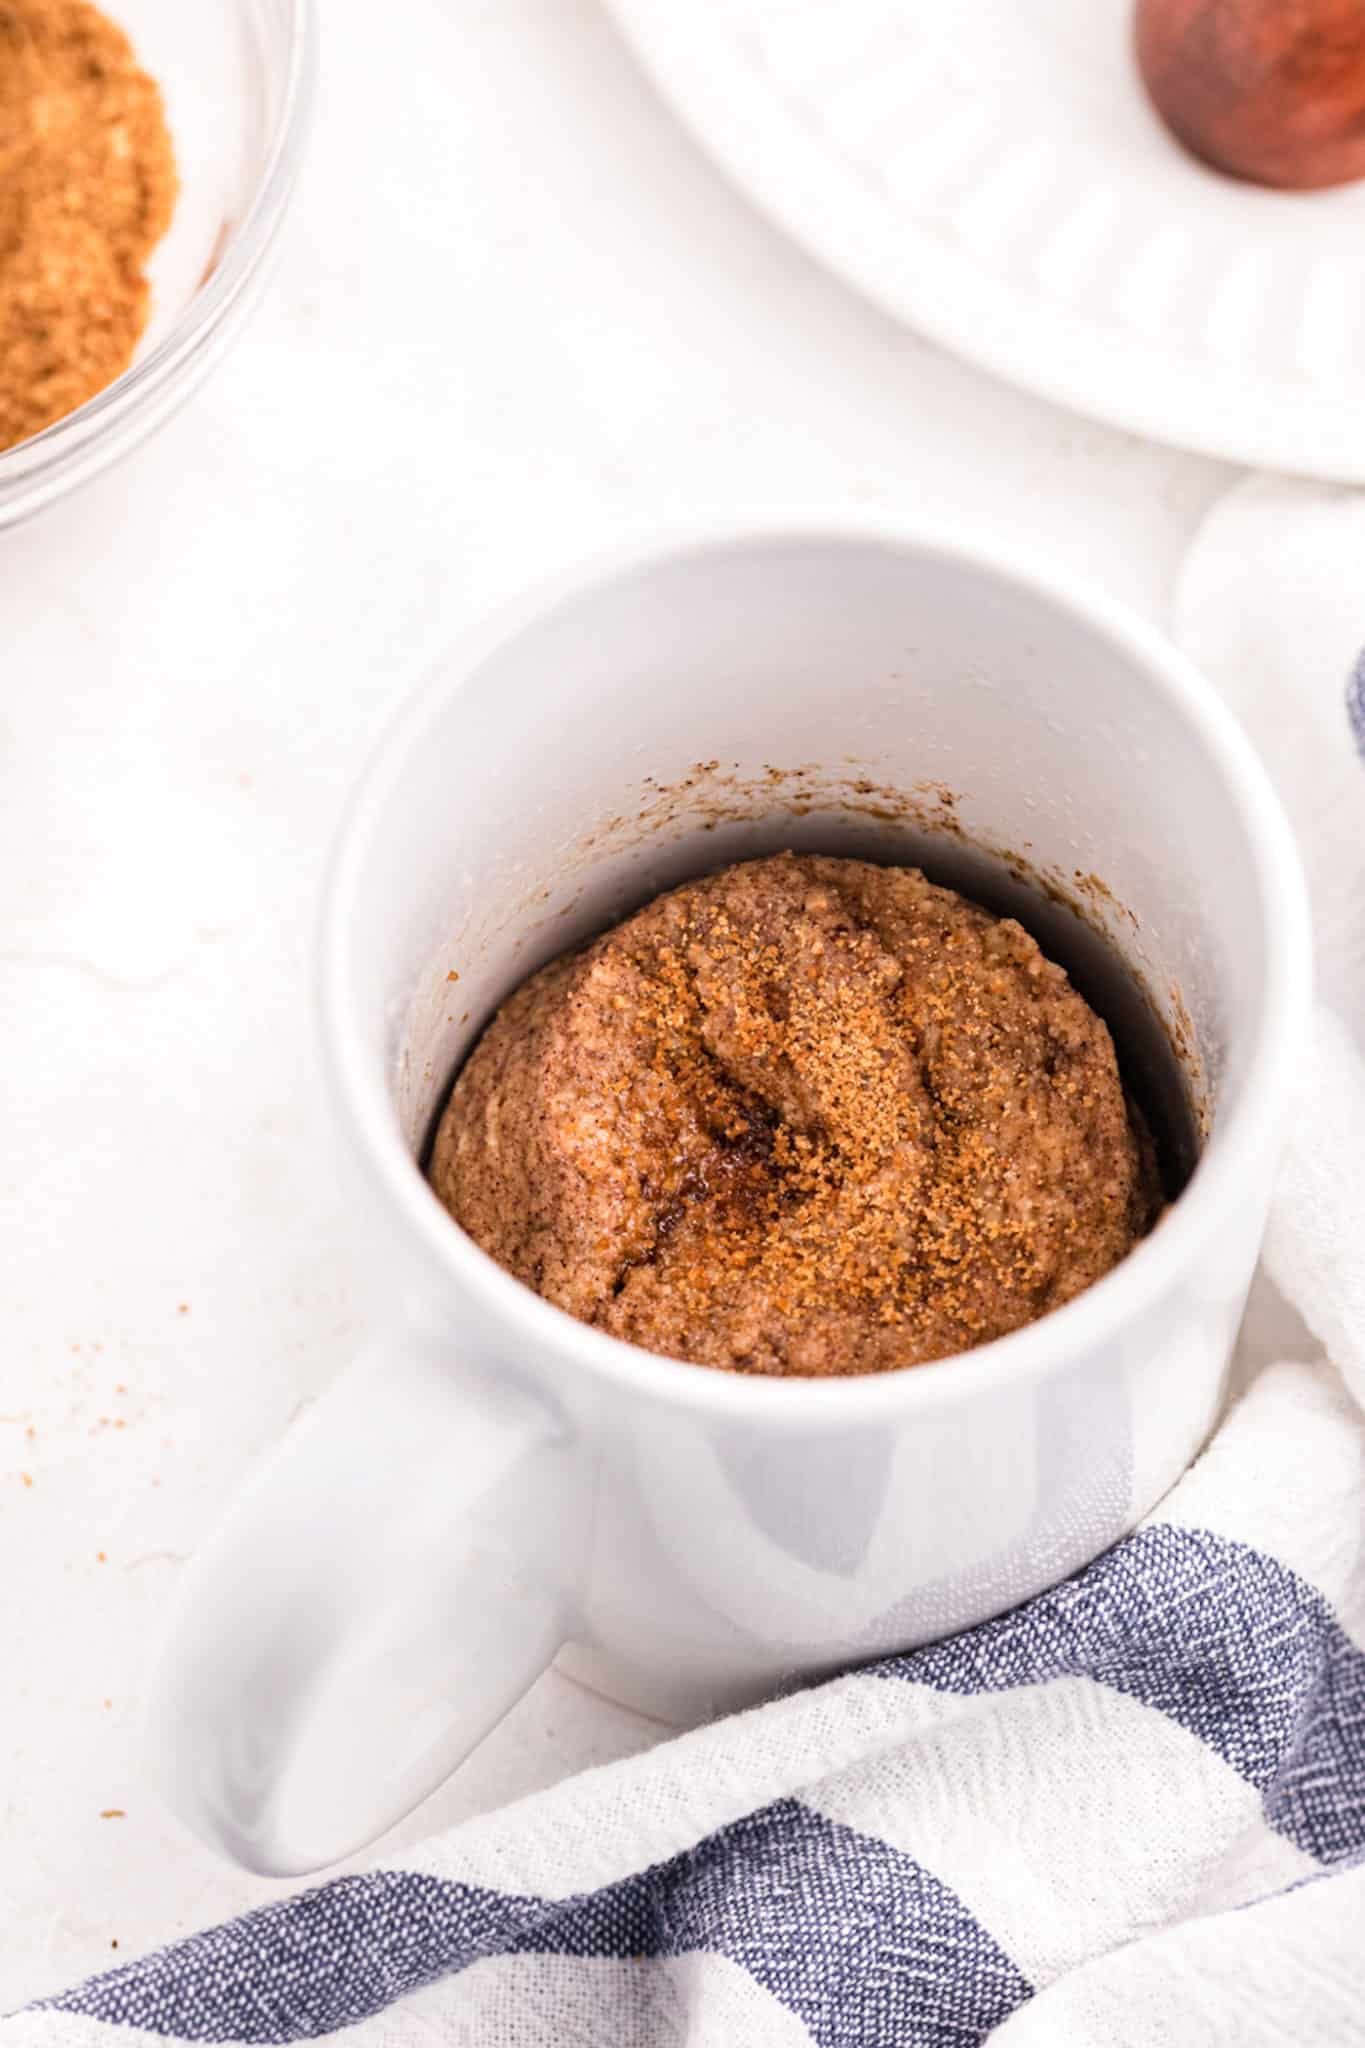 A microwaved snickerdoodle mug cake in a small white mug.